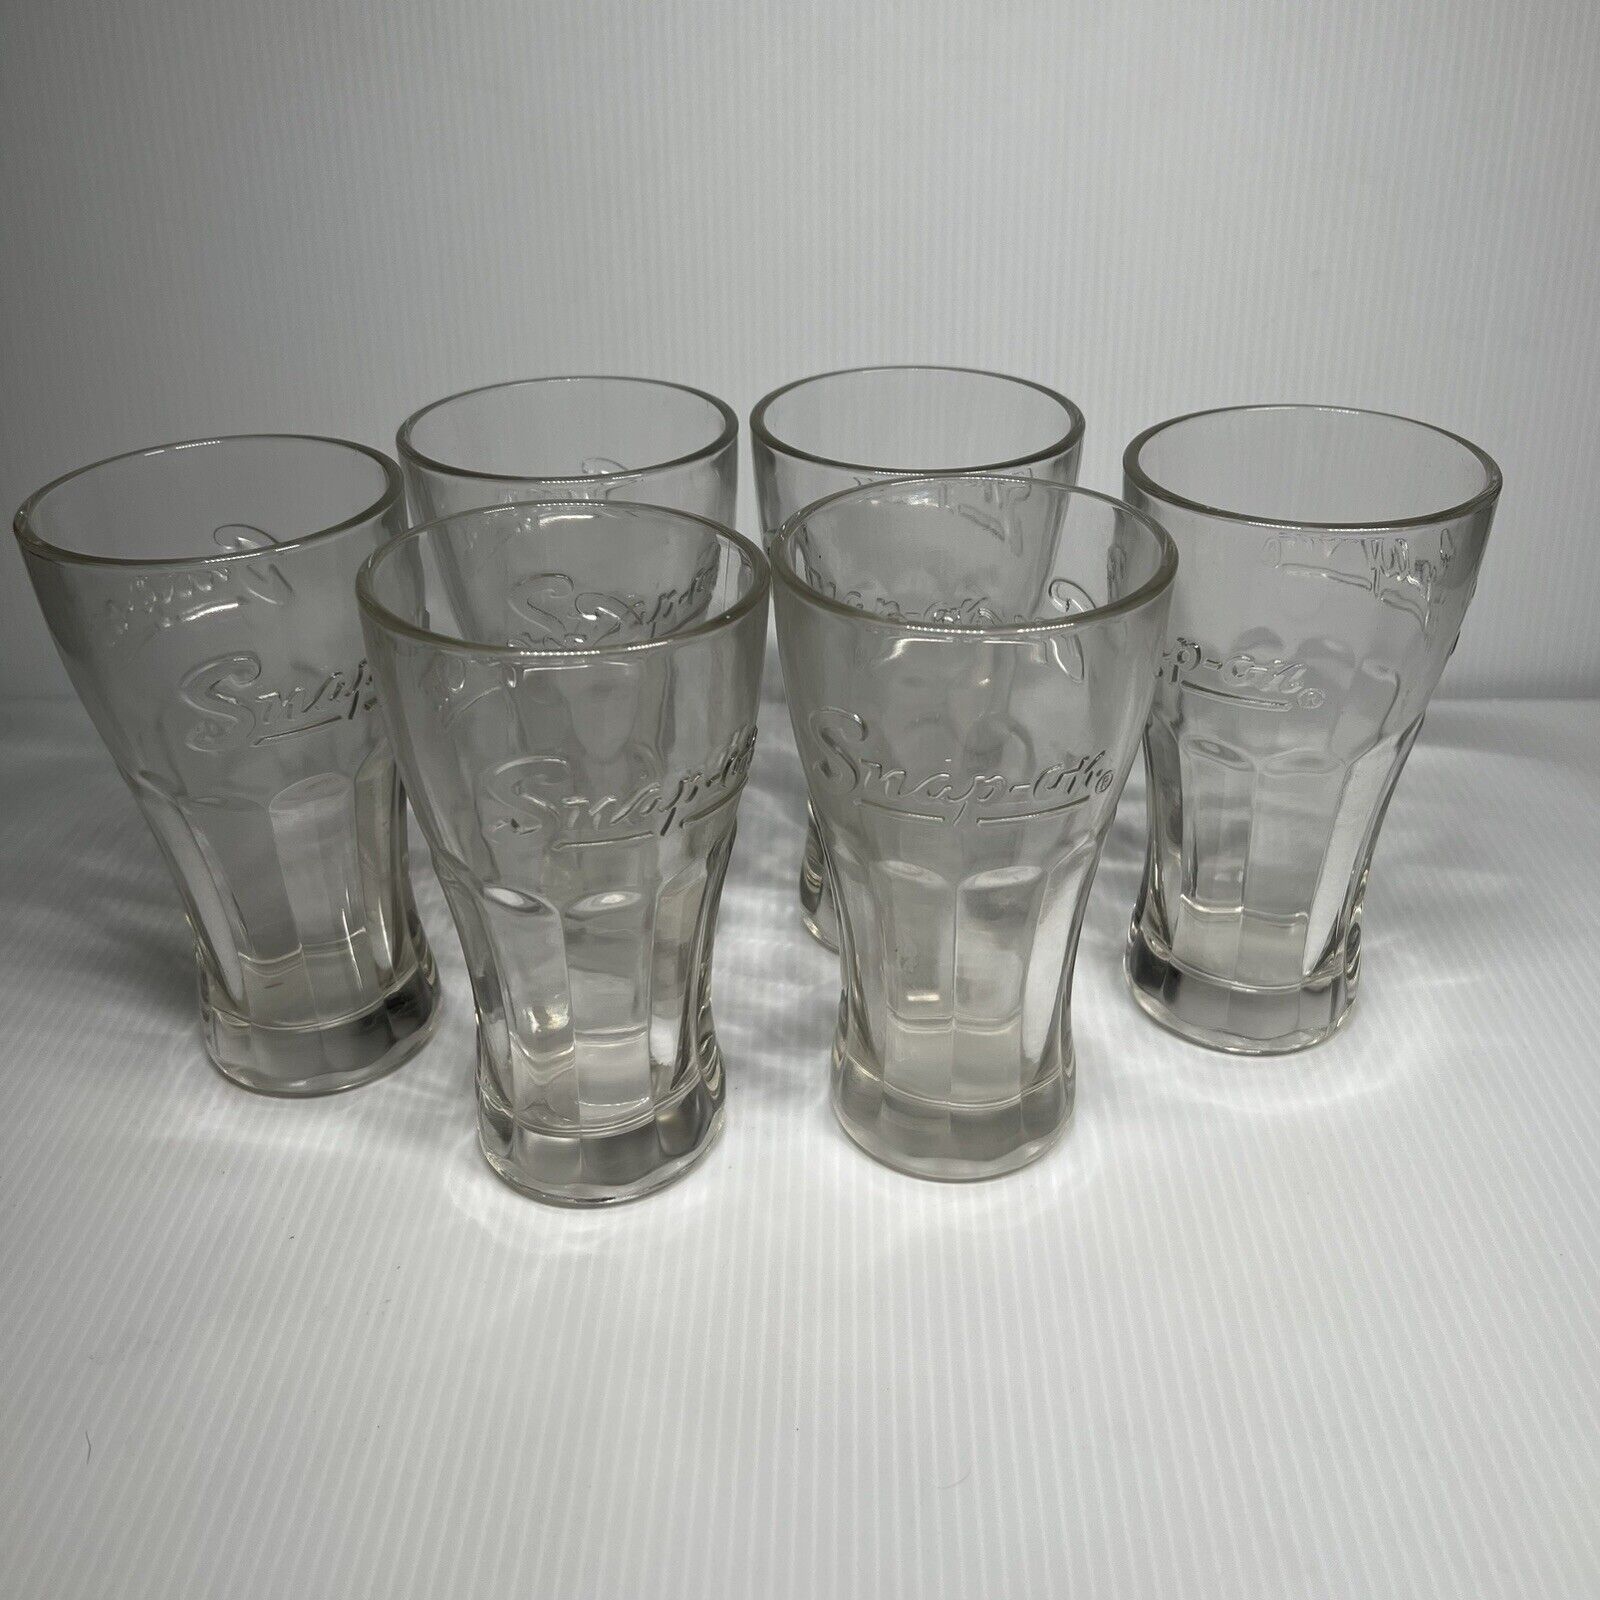 Snap On Tools Clear Vintage Cola Glasses Heavy Thick Glasses set of 6